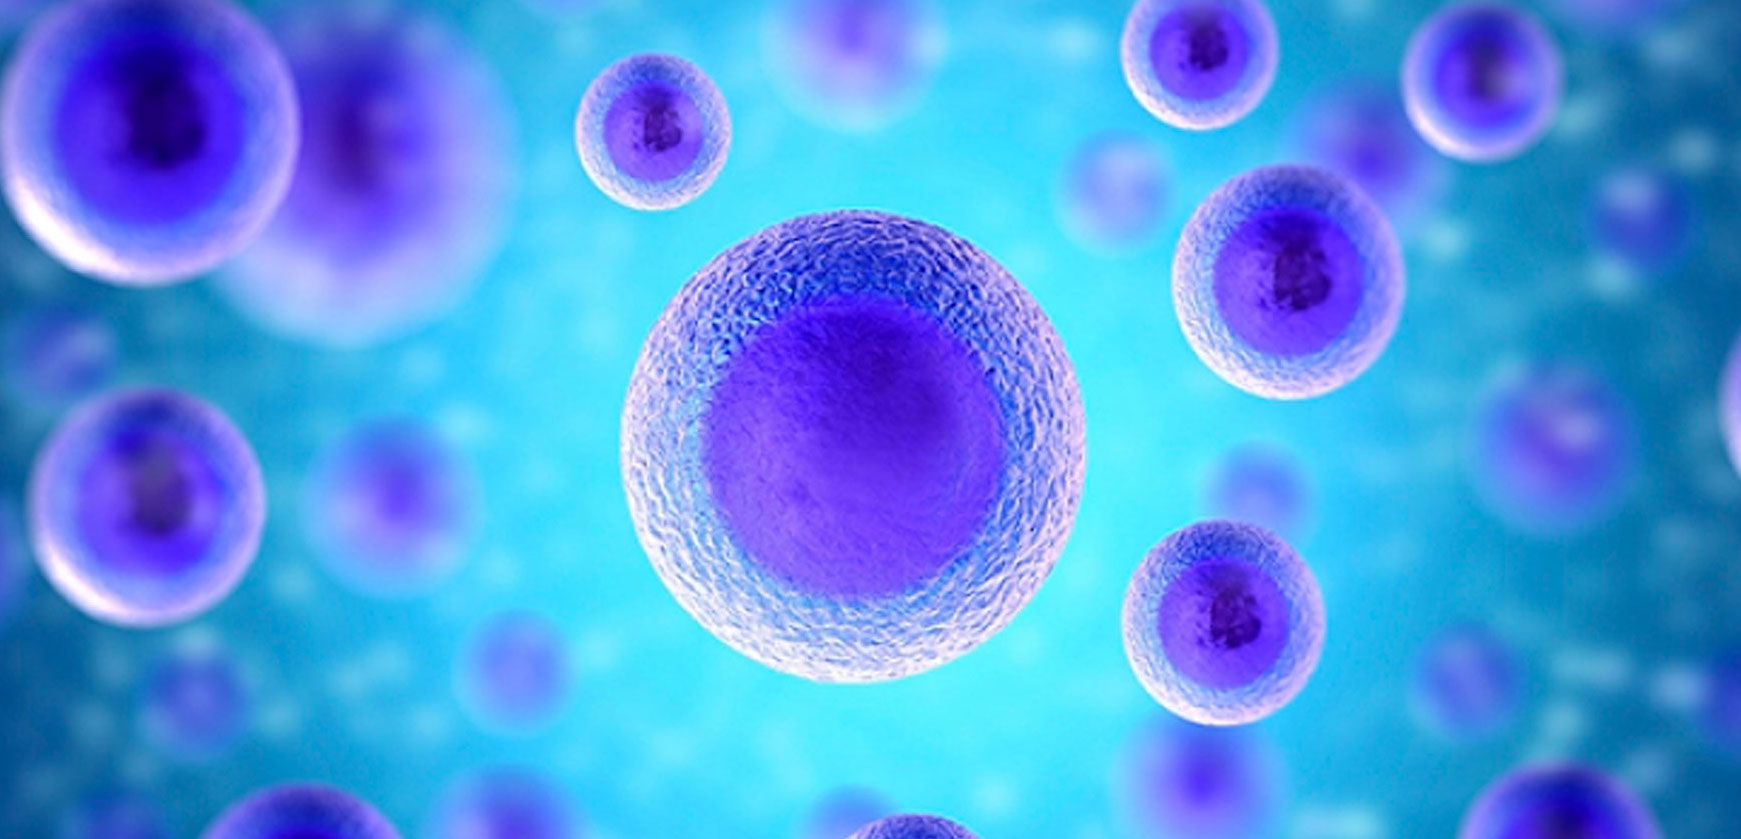 Researchers confine mature cells to turn them into stem cells...